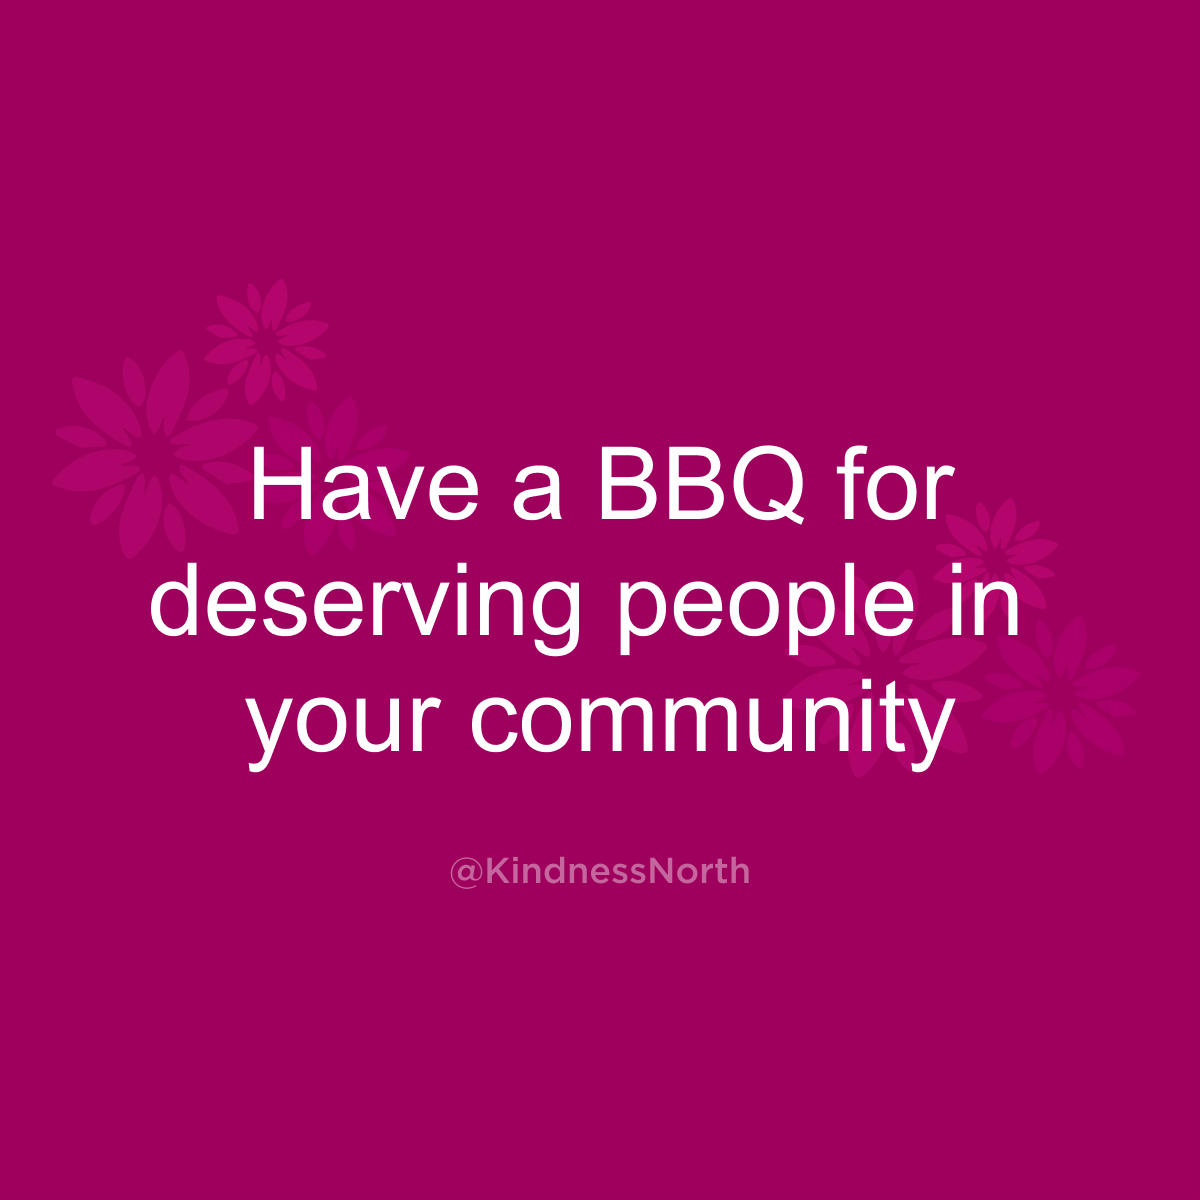 Have a BBQ for deserving people in your community